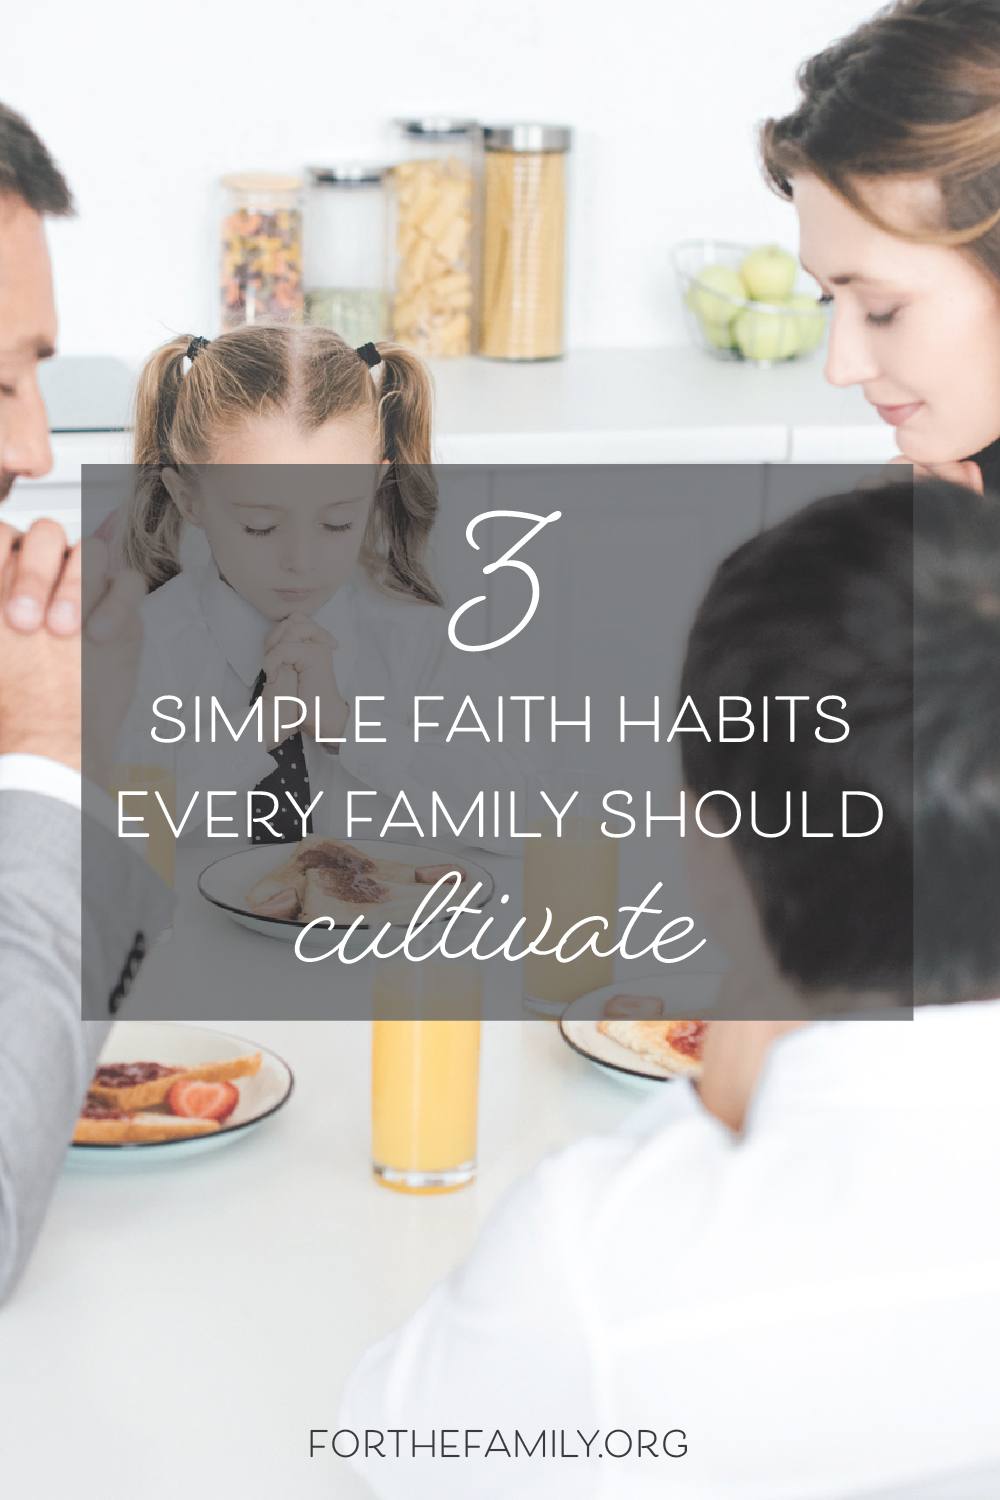 3 Simple Faith Habits Every Family Should Cultivate